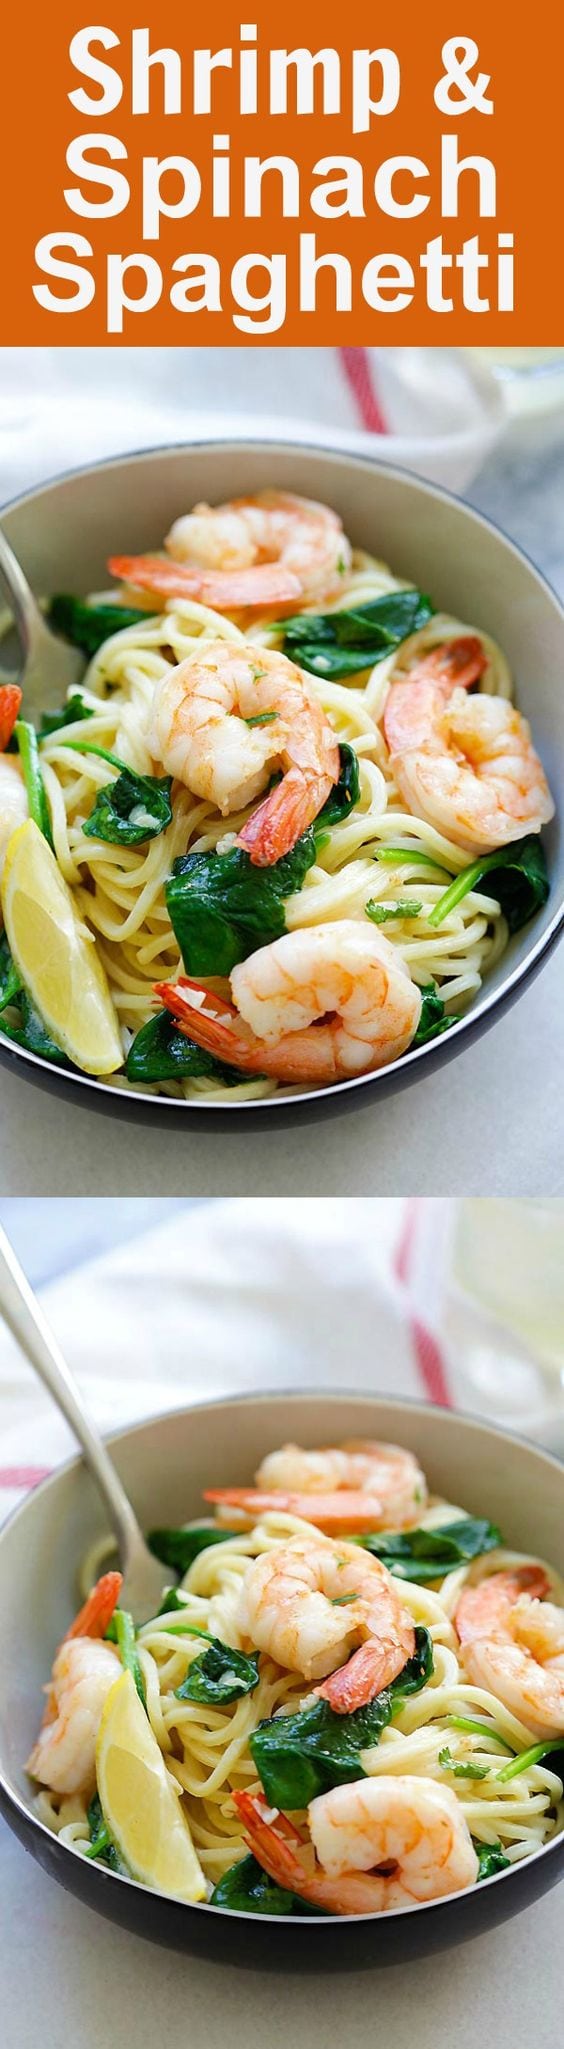 Shrimp and Spinach Spaghetti – quick and easy homemade spaghetti with shrimp and spinach in garlic butter sauce. Dinner takes 20 mins | rasamalaysia.com